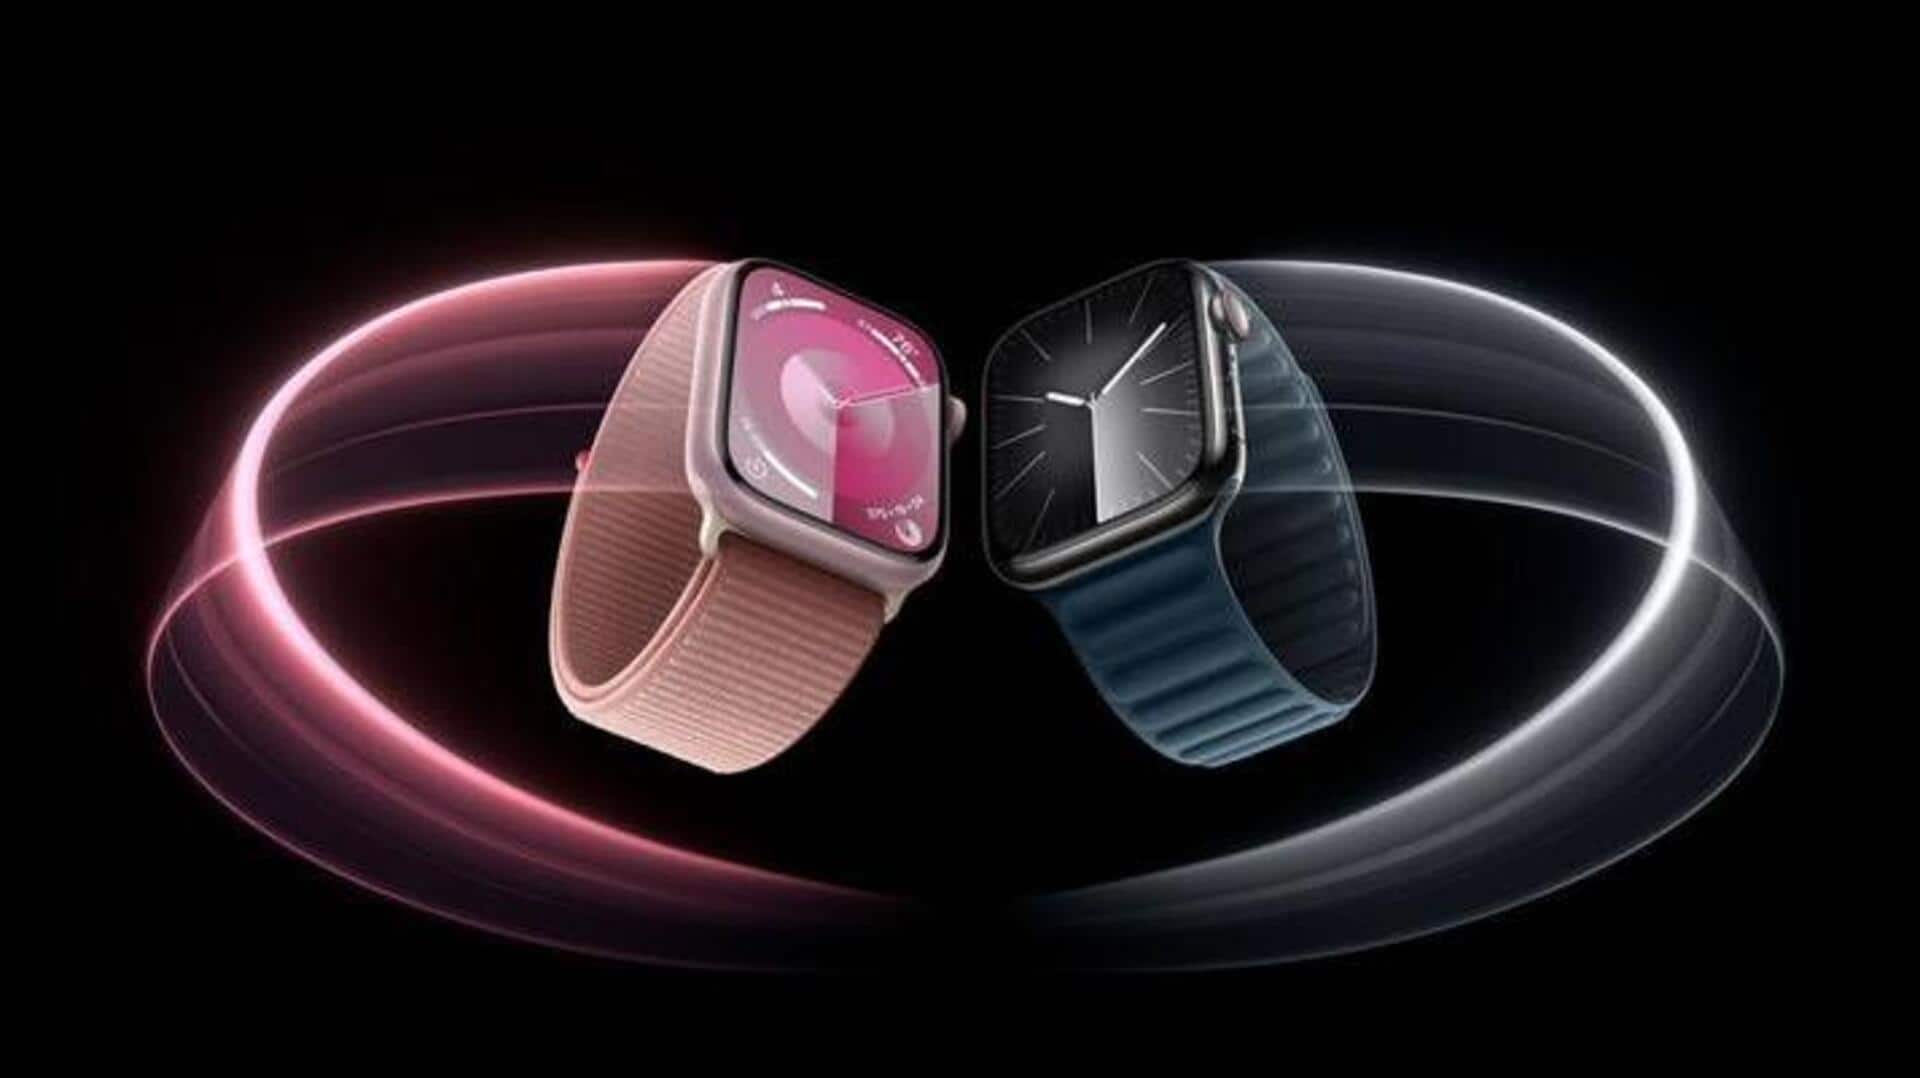 Apple can sell its latest smartwatch models in US again